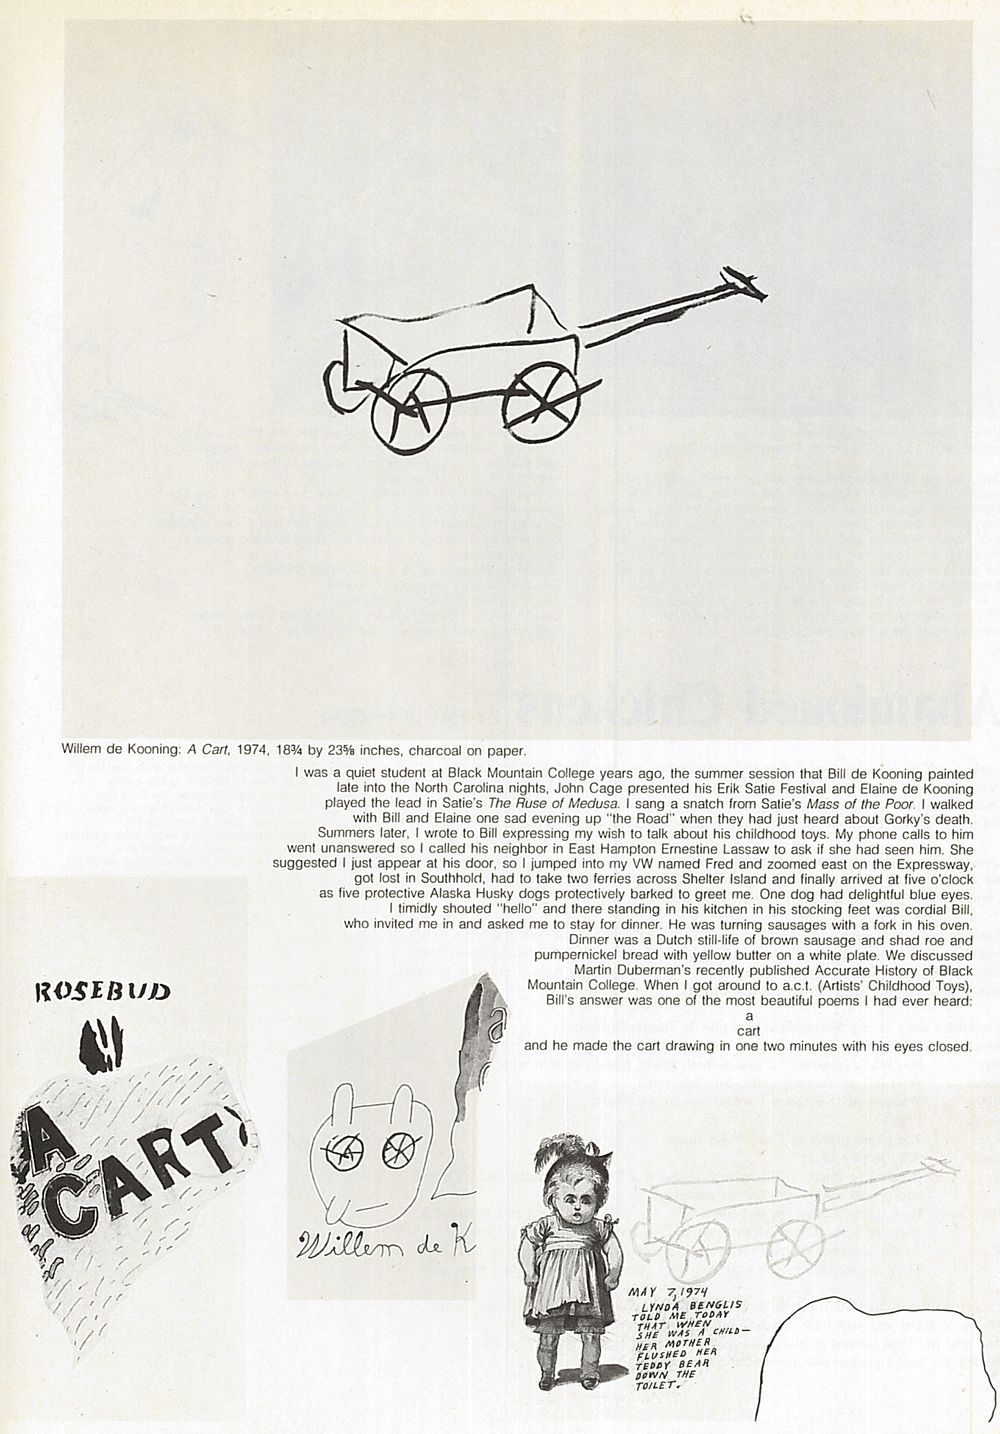 Page from Ray Johnson's article "Abandoned Chickens" in the November to December 1974 issue of Art in America